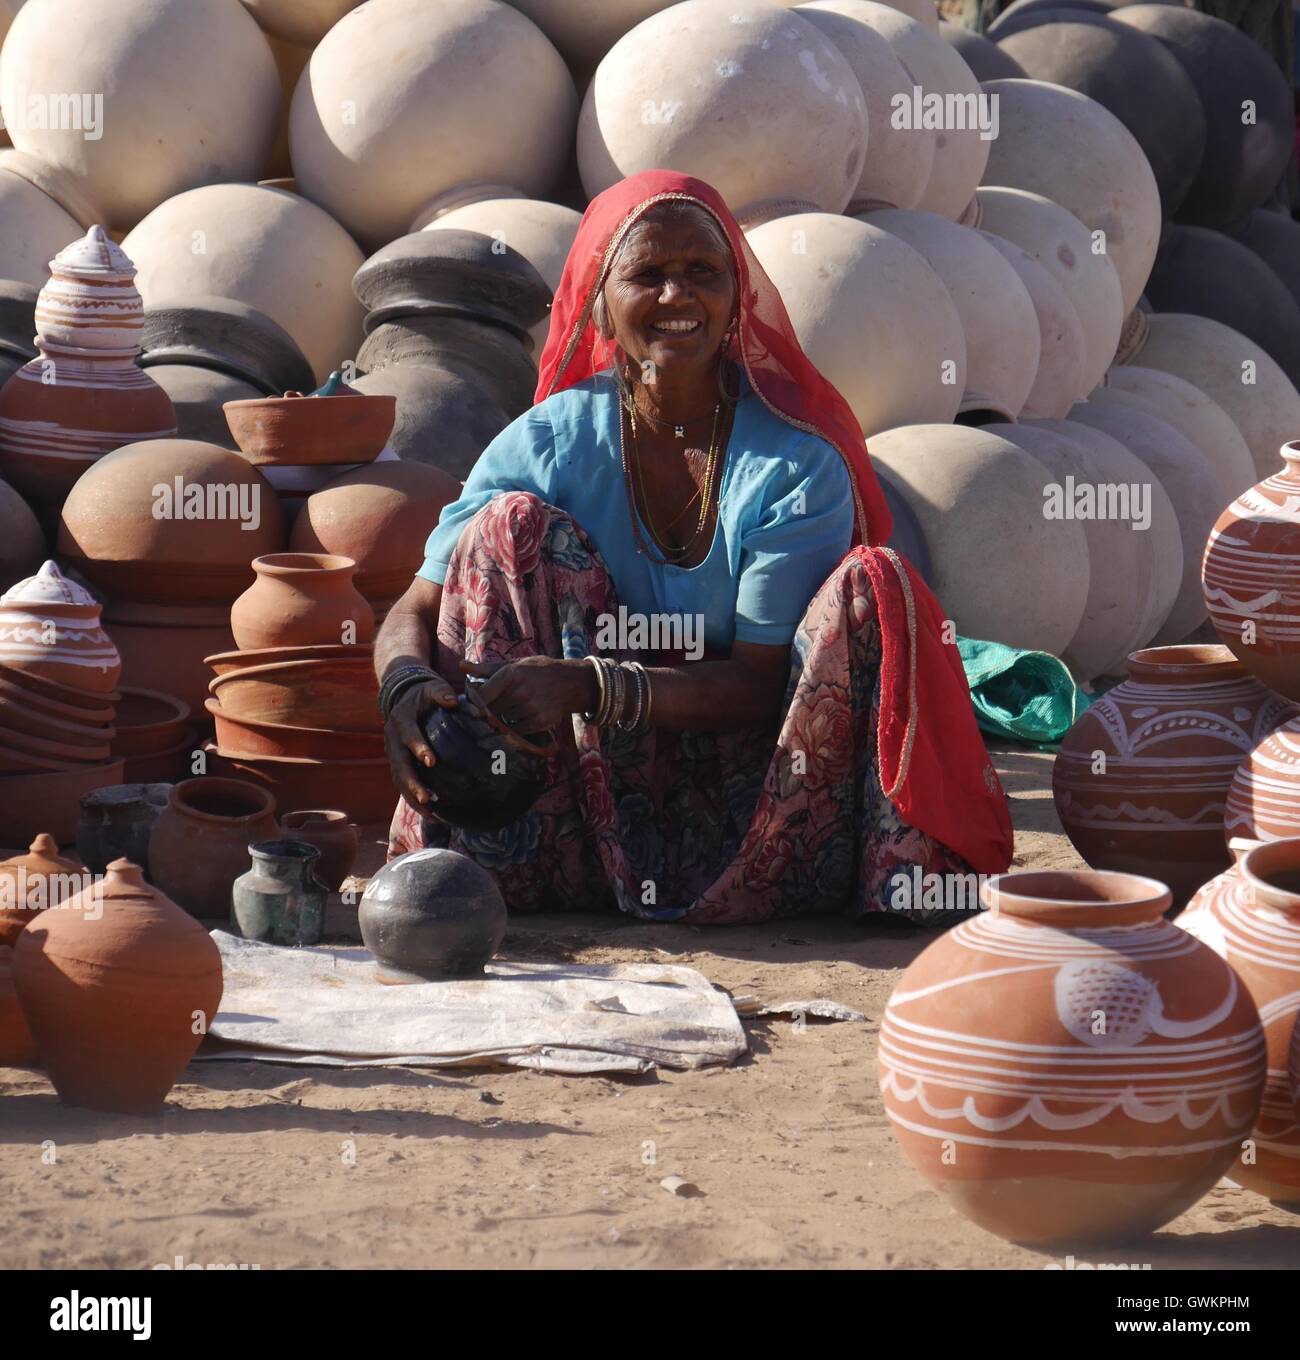 A smiling Indian woman in typical clothes and jewellery of Rajasthan, NW India sits on the ground selling round clay water pots Stock Photo